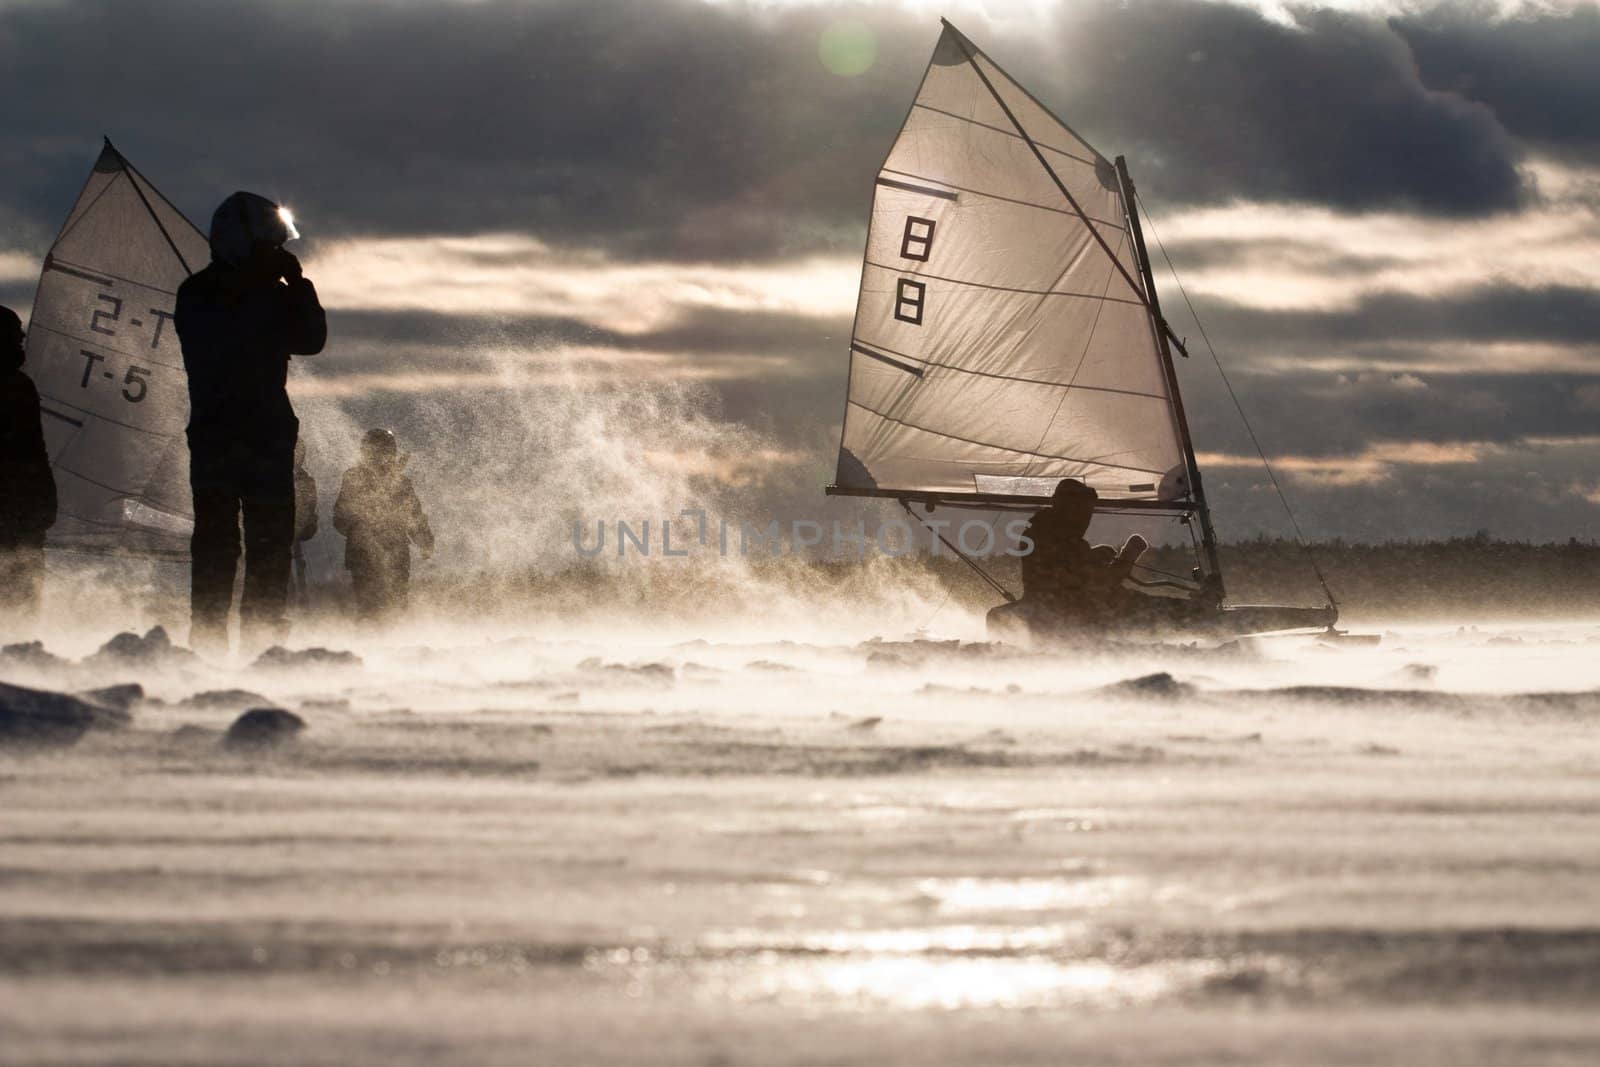 Ice-sailor's speeding up in a race. Facing an extreme blizzard, strong wind